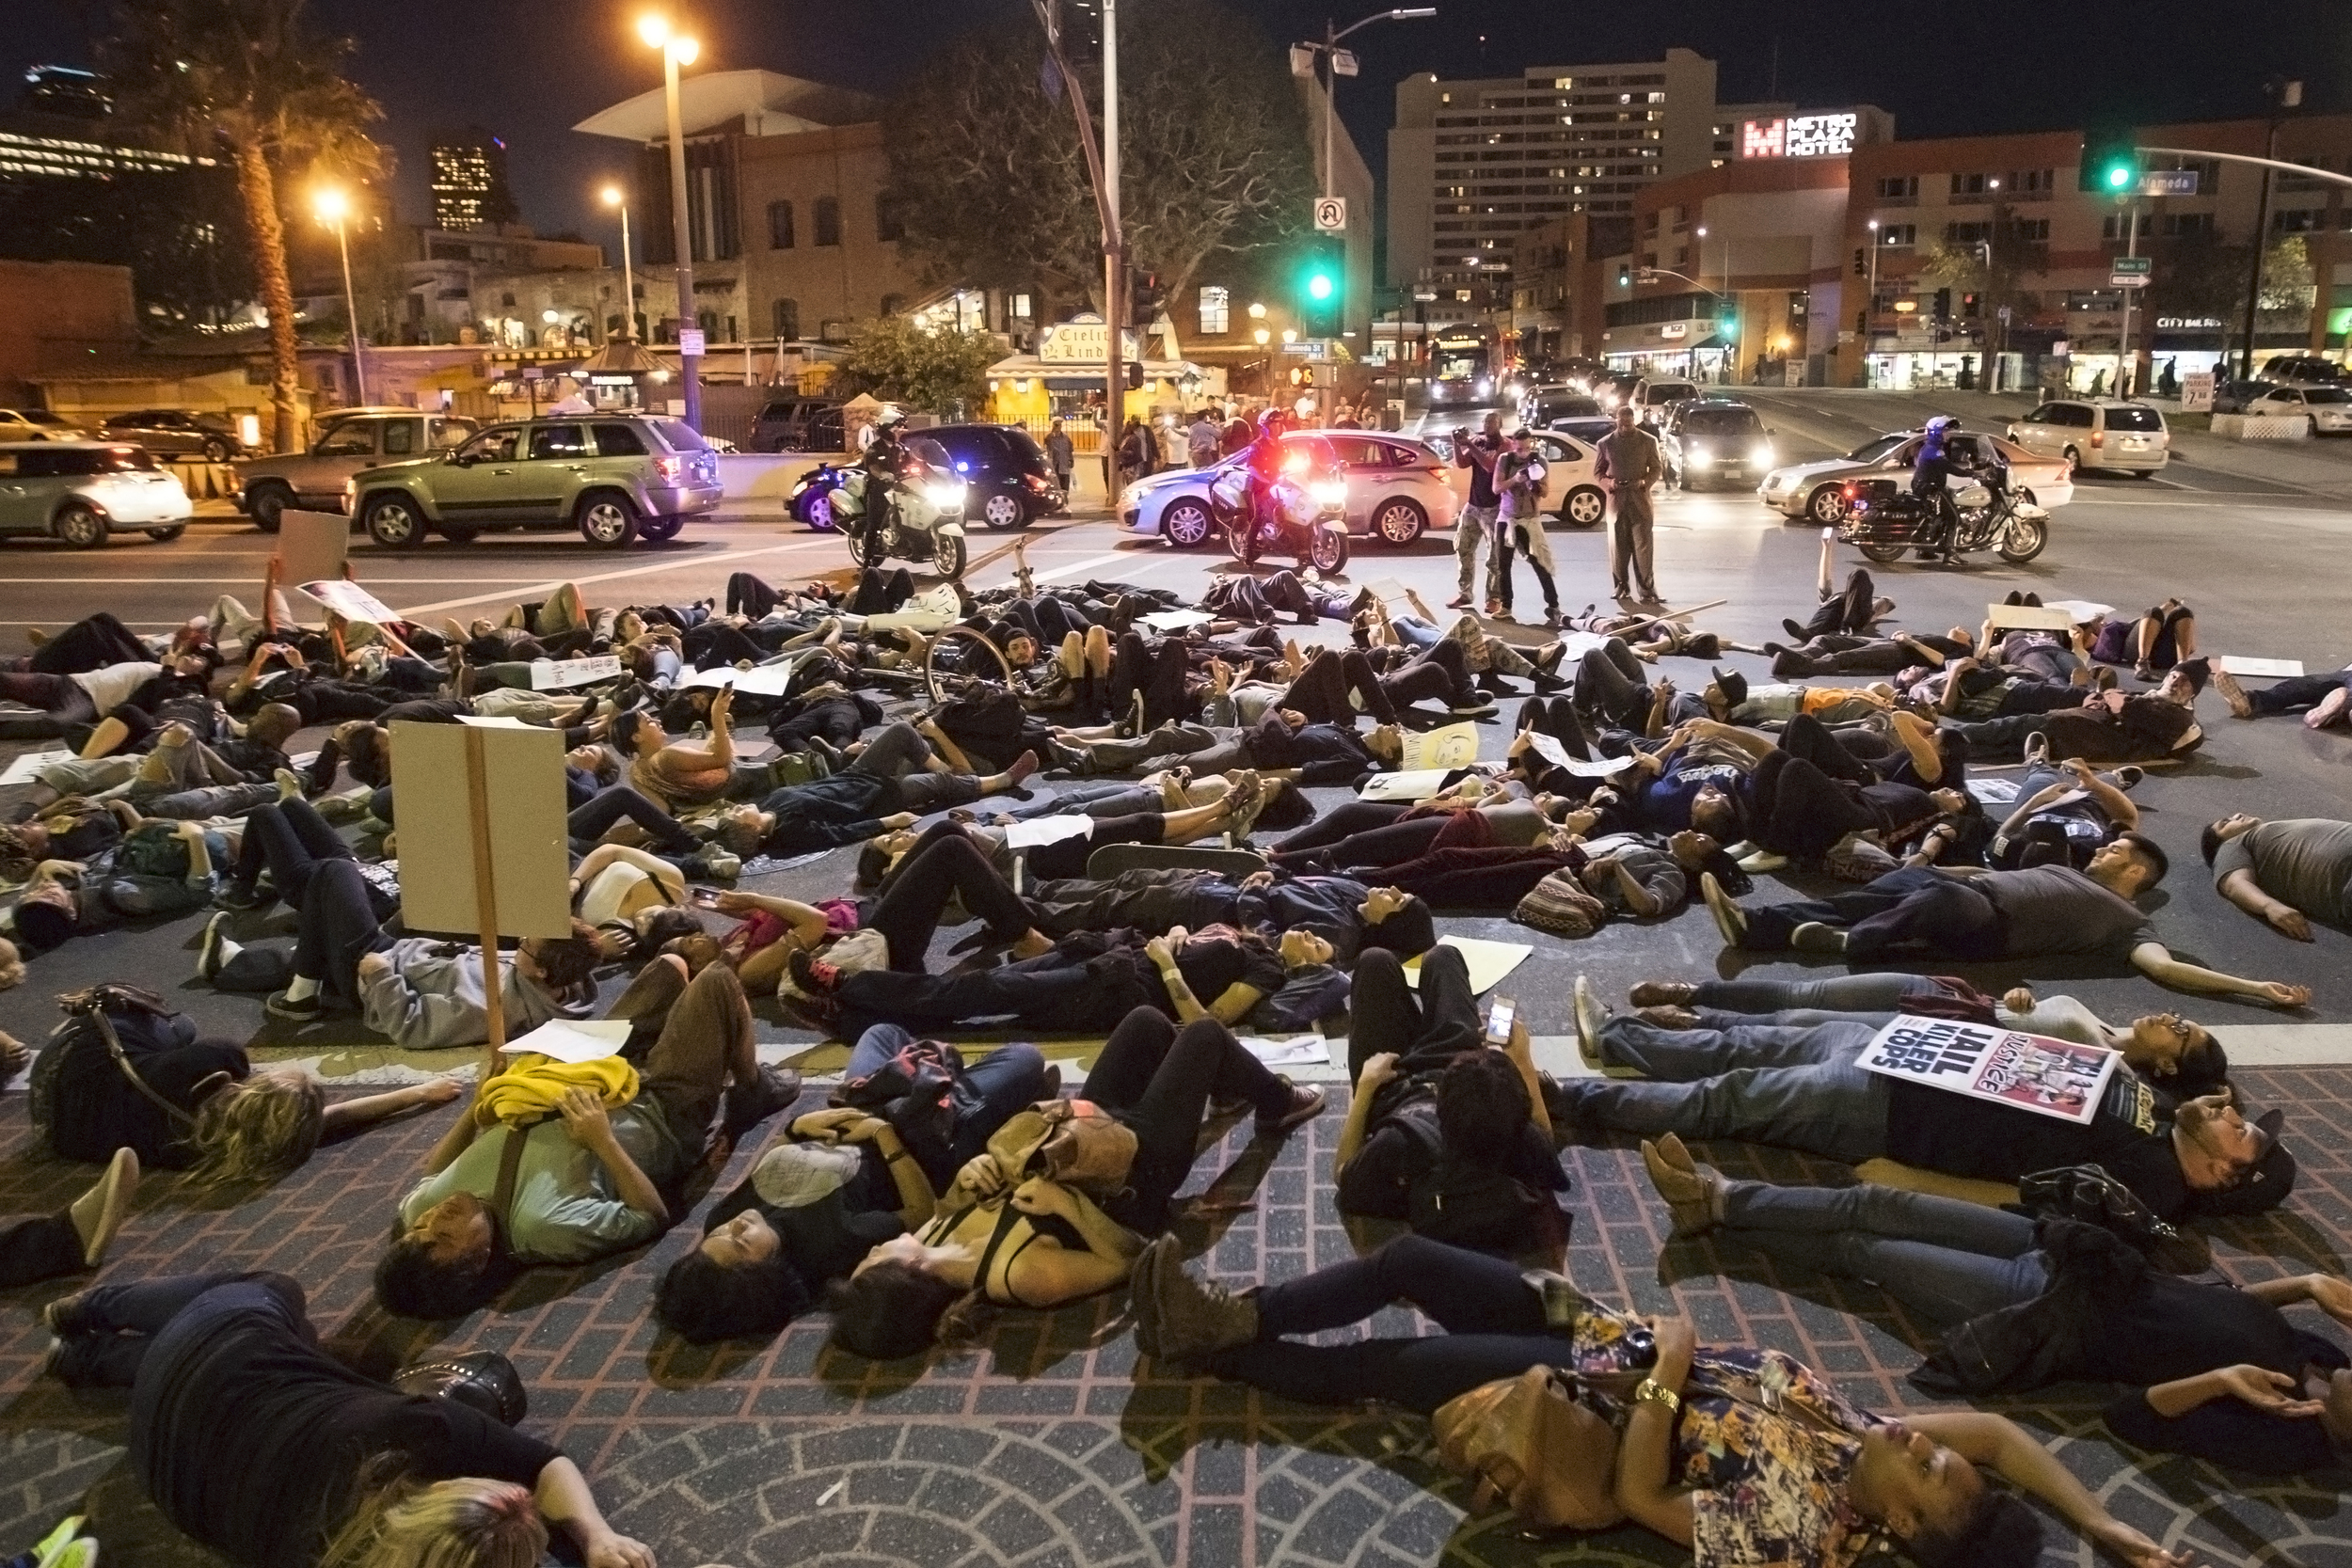  After a grand jury handed down a verdict not indict officer Darren Wilson for the shooting death of Mike Brown, protests and rallys were organized throughout the United States by groups in opposition to the decision. Protesters in Los Angeles marche